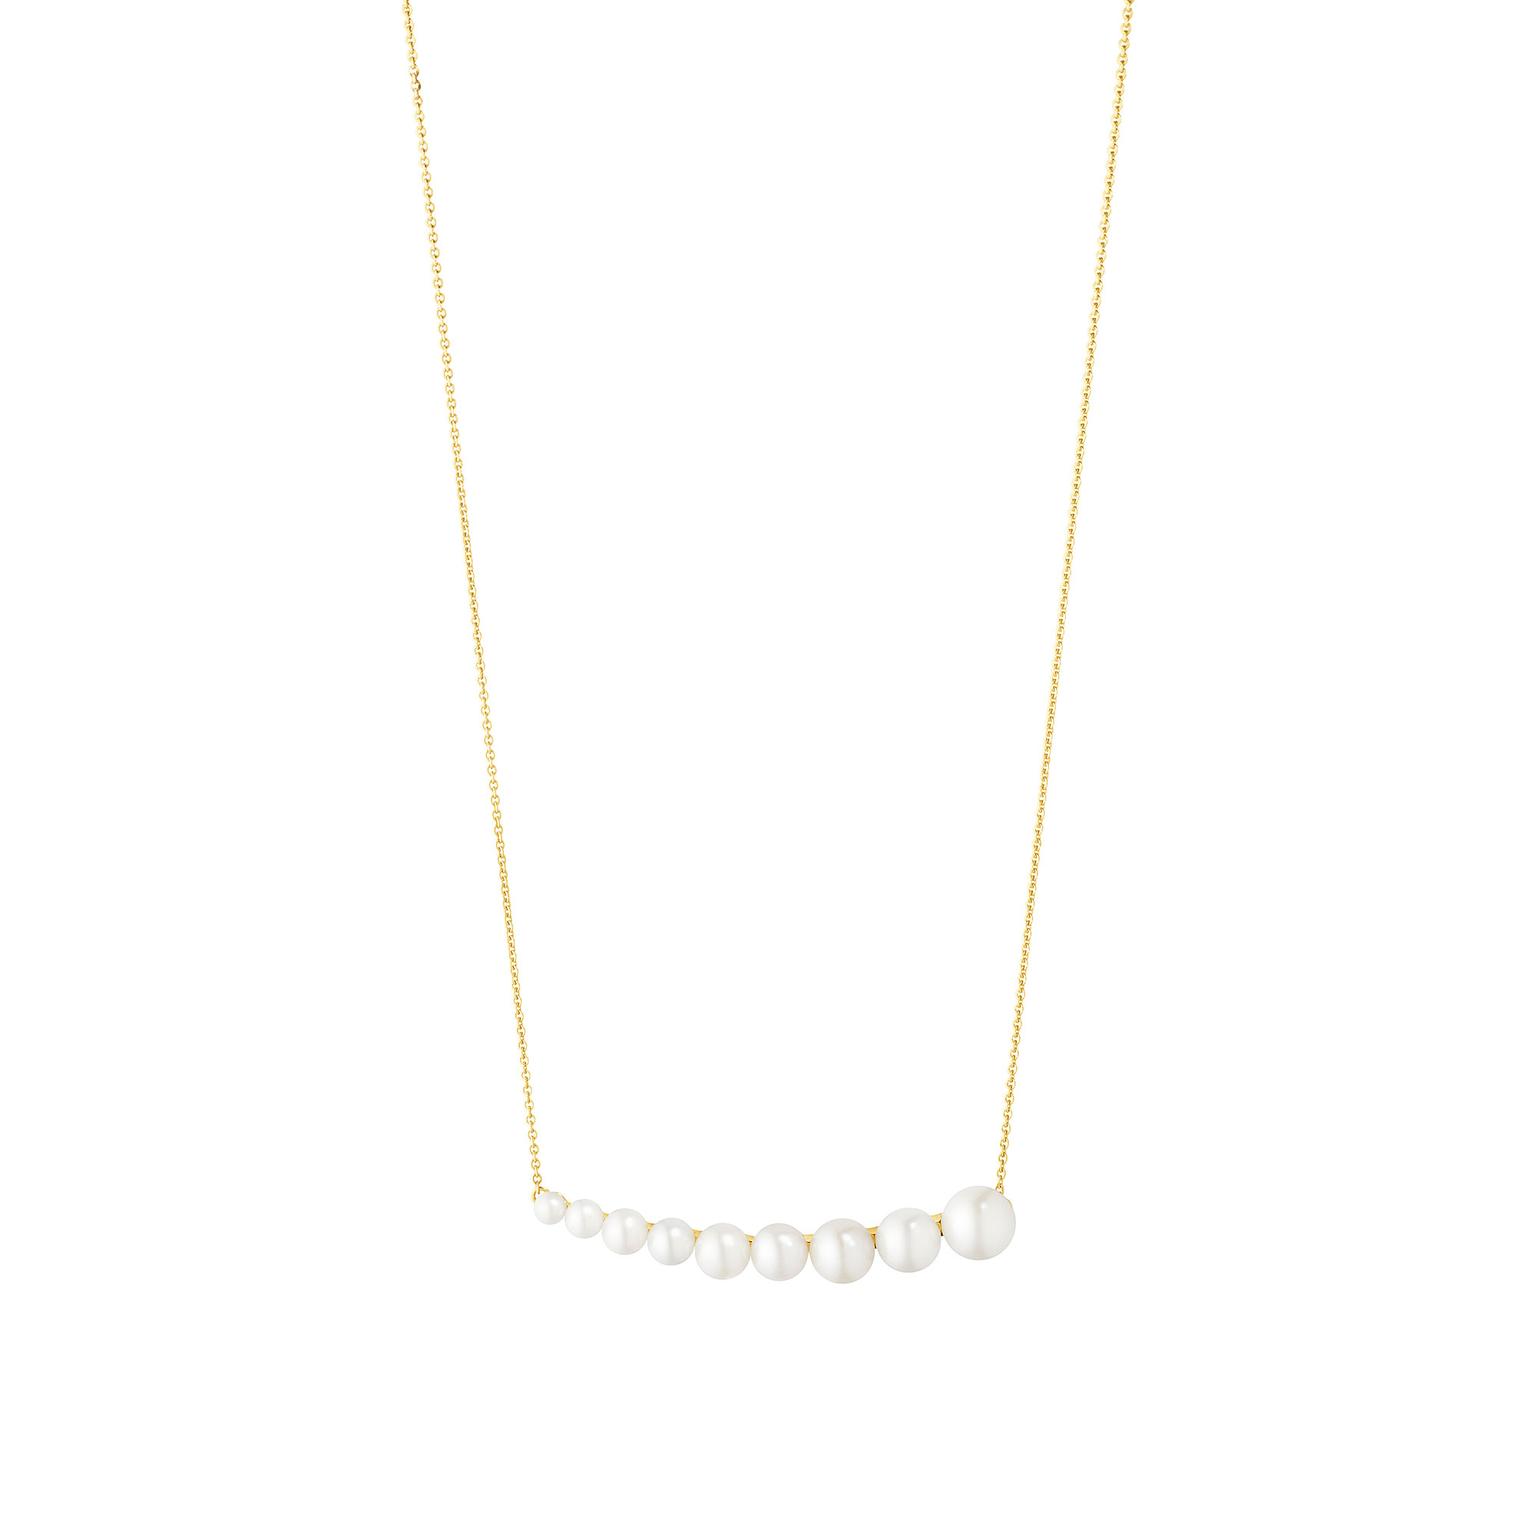 Georg Jensen pearl necklace from the Neva collection in 18ct yellow gold with white cultured Freshwater pearls